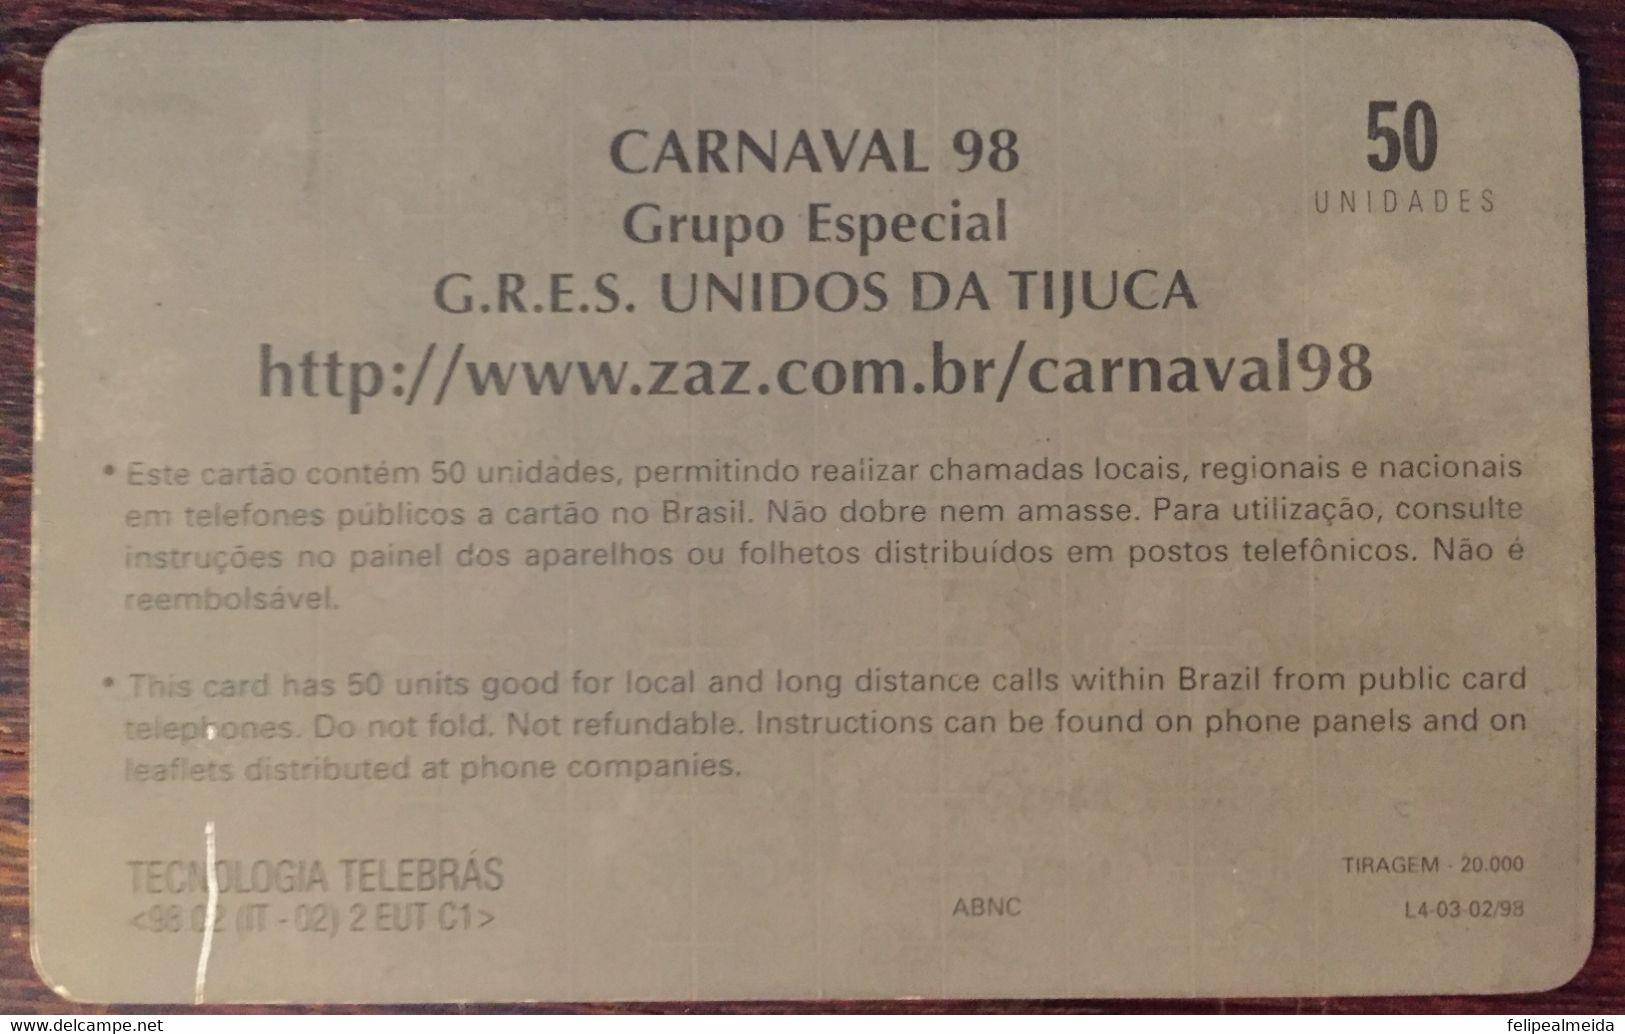 Phone Card Manufactured By Telebras In 1998 - Carnival Of 1998 - Series Special Group Of Samba Schools Of Rio De Jan - Cultura